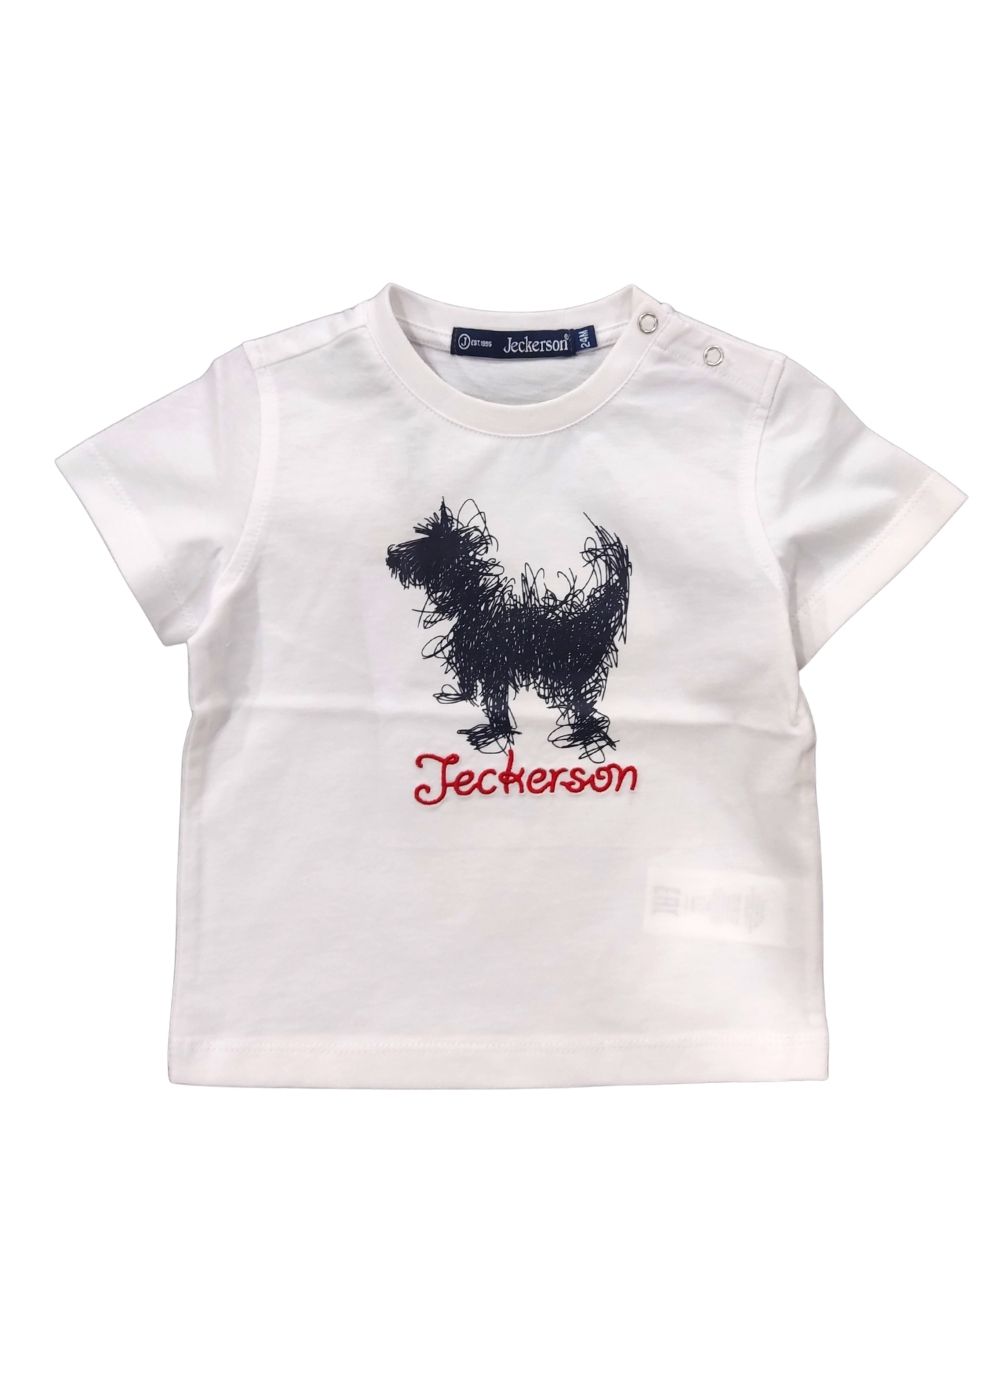 Featured image for “Jeckerson T-shirt con stampa”